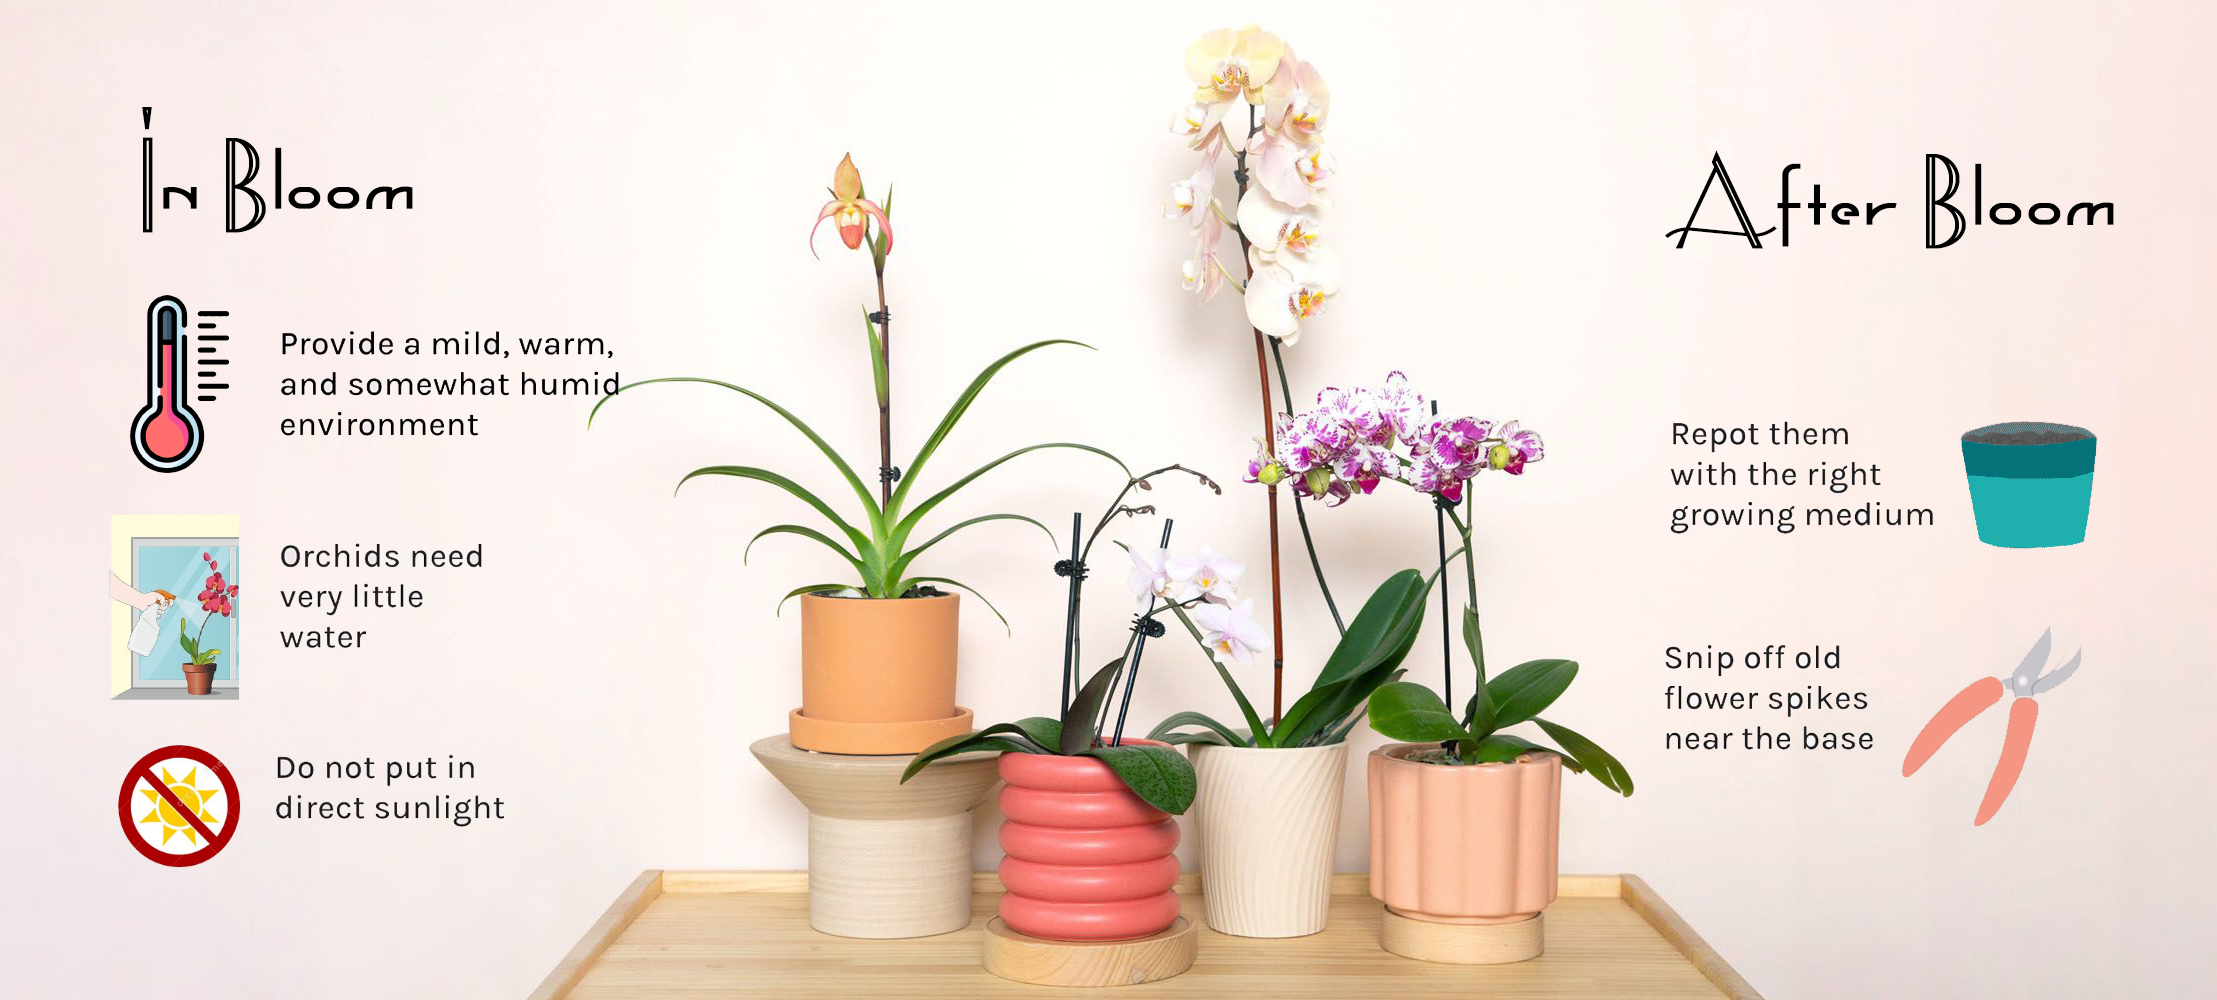 Orchid Care: 10 Easy Tips.